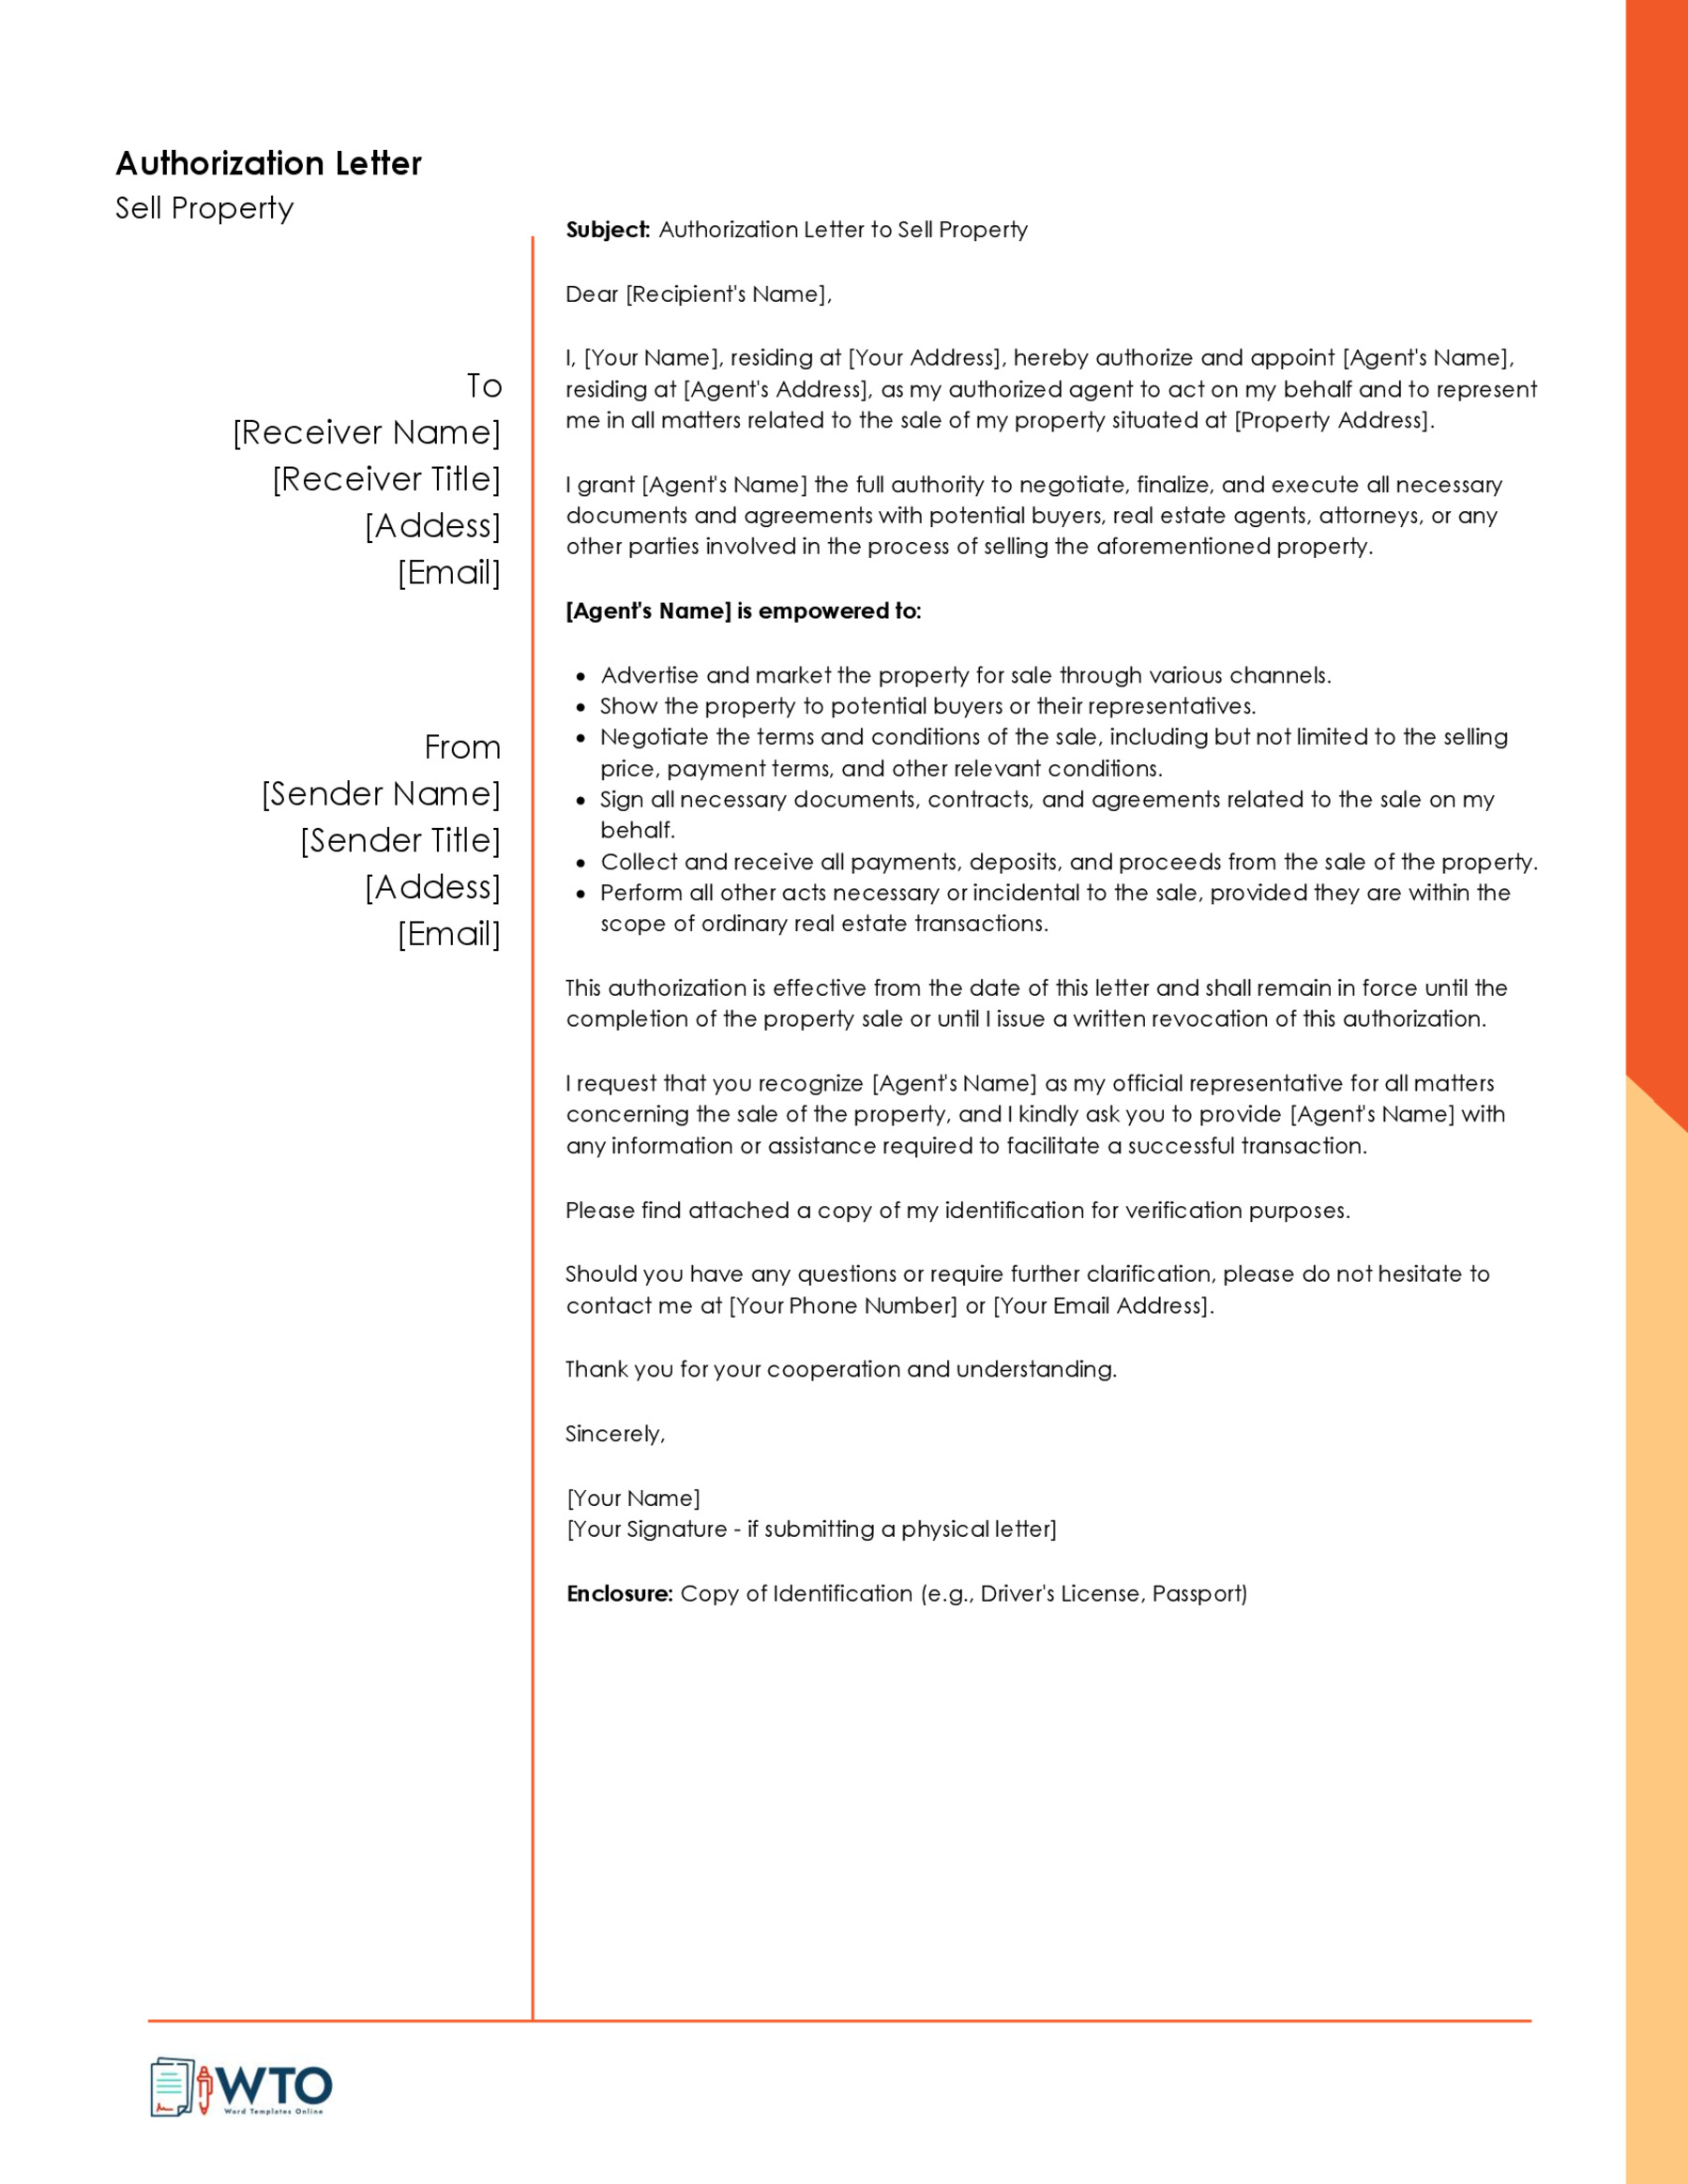 Letter to Sell Property Template Free download